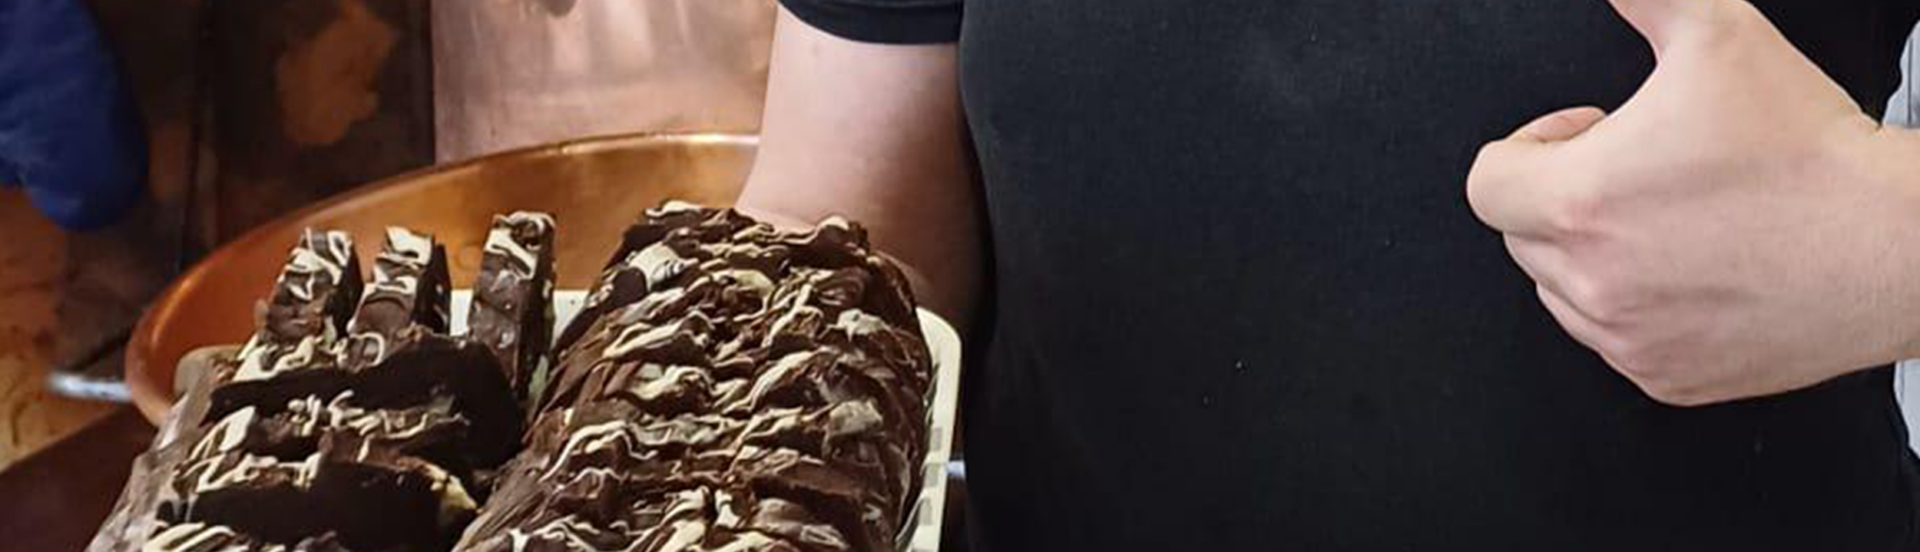 Fudge Kitchen “makes life sweeter” for disabled and autistic children